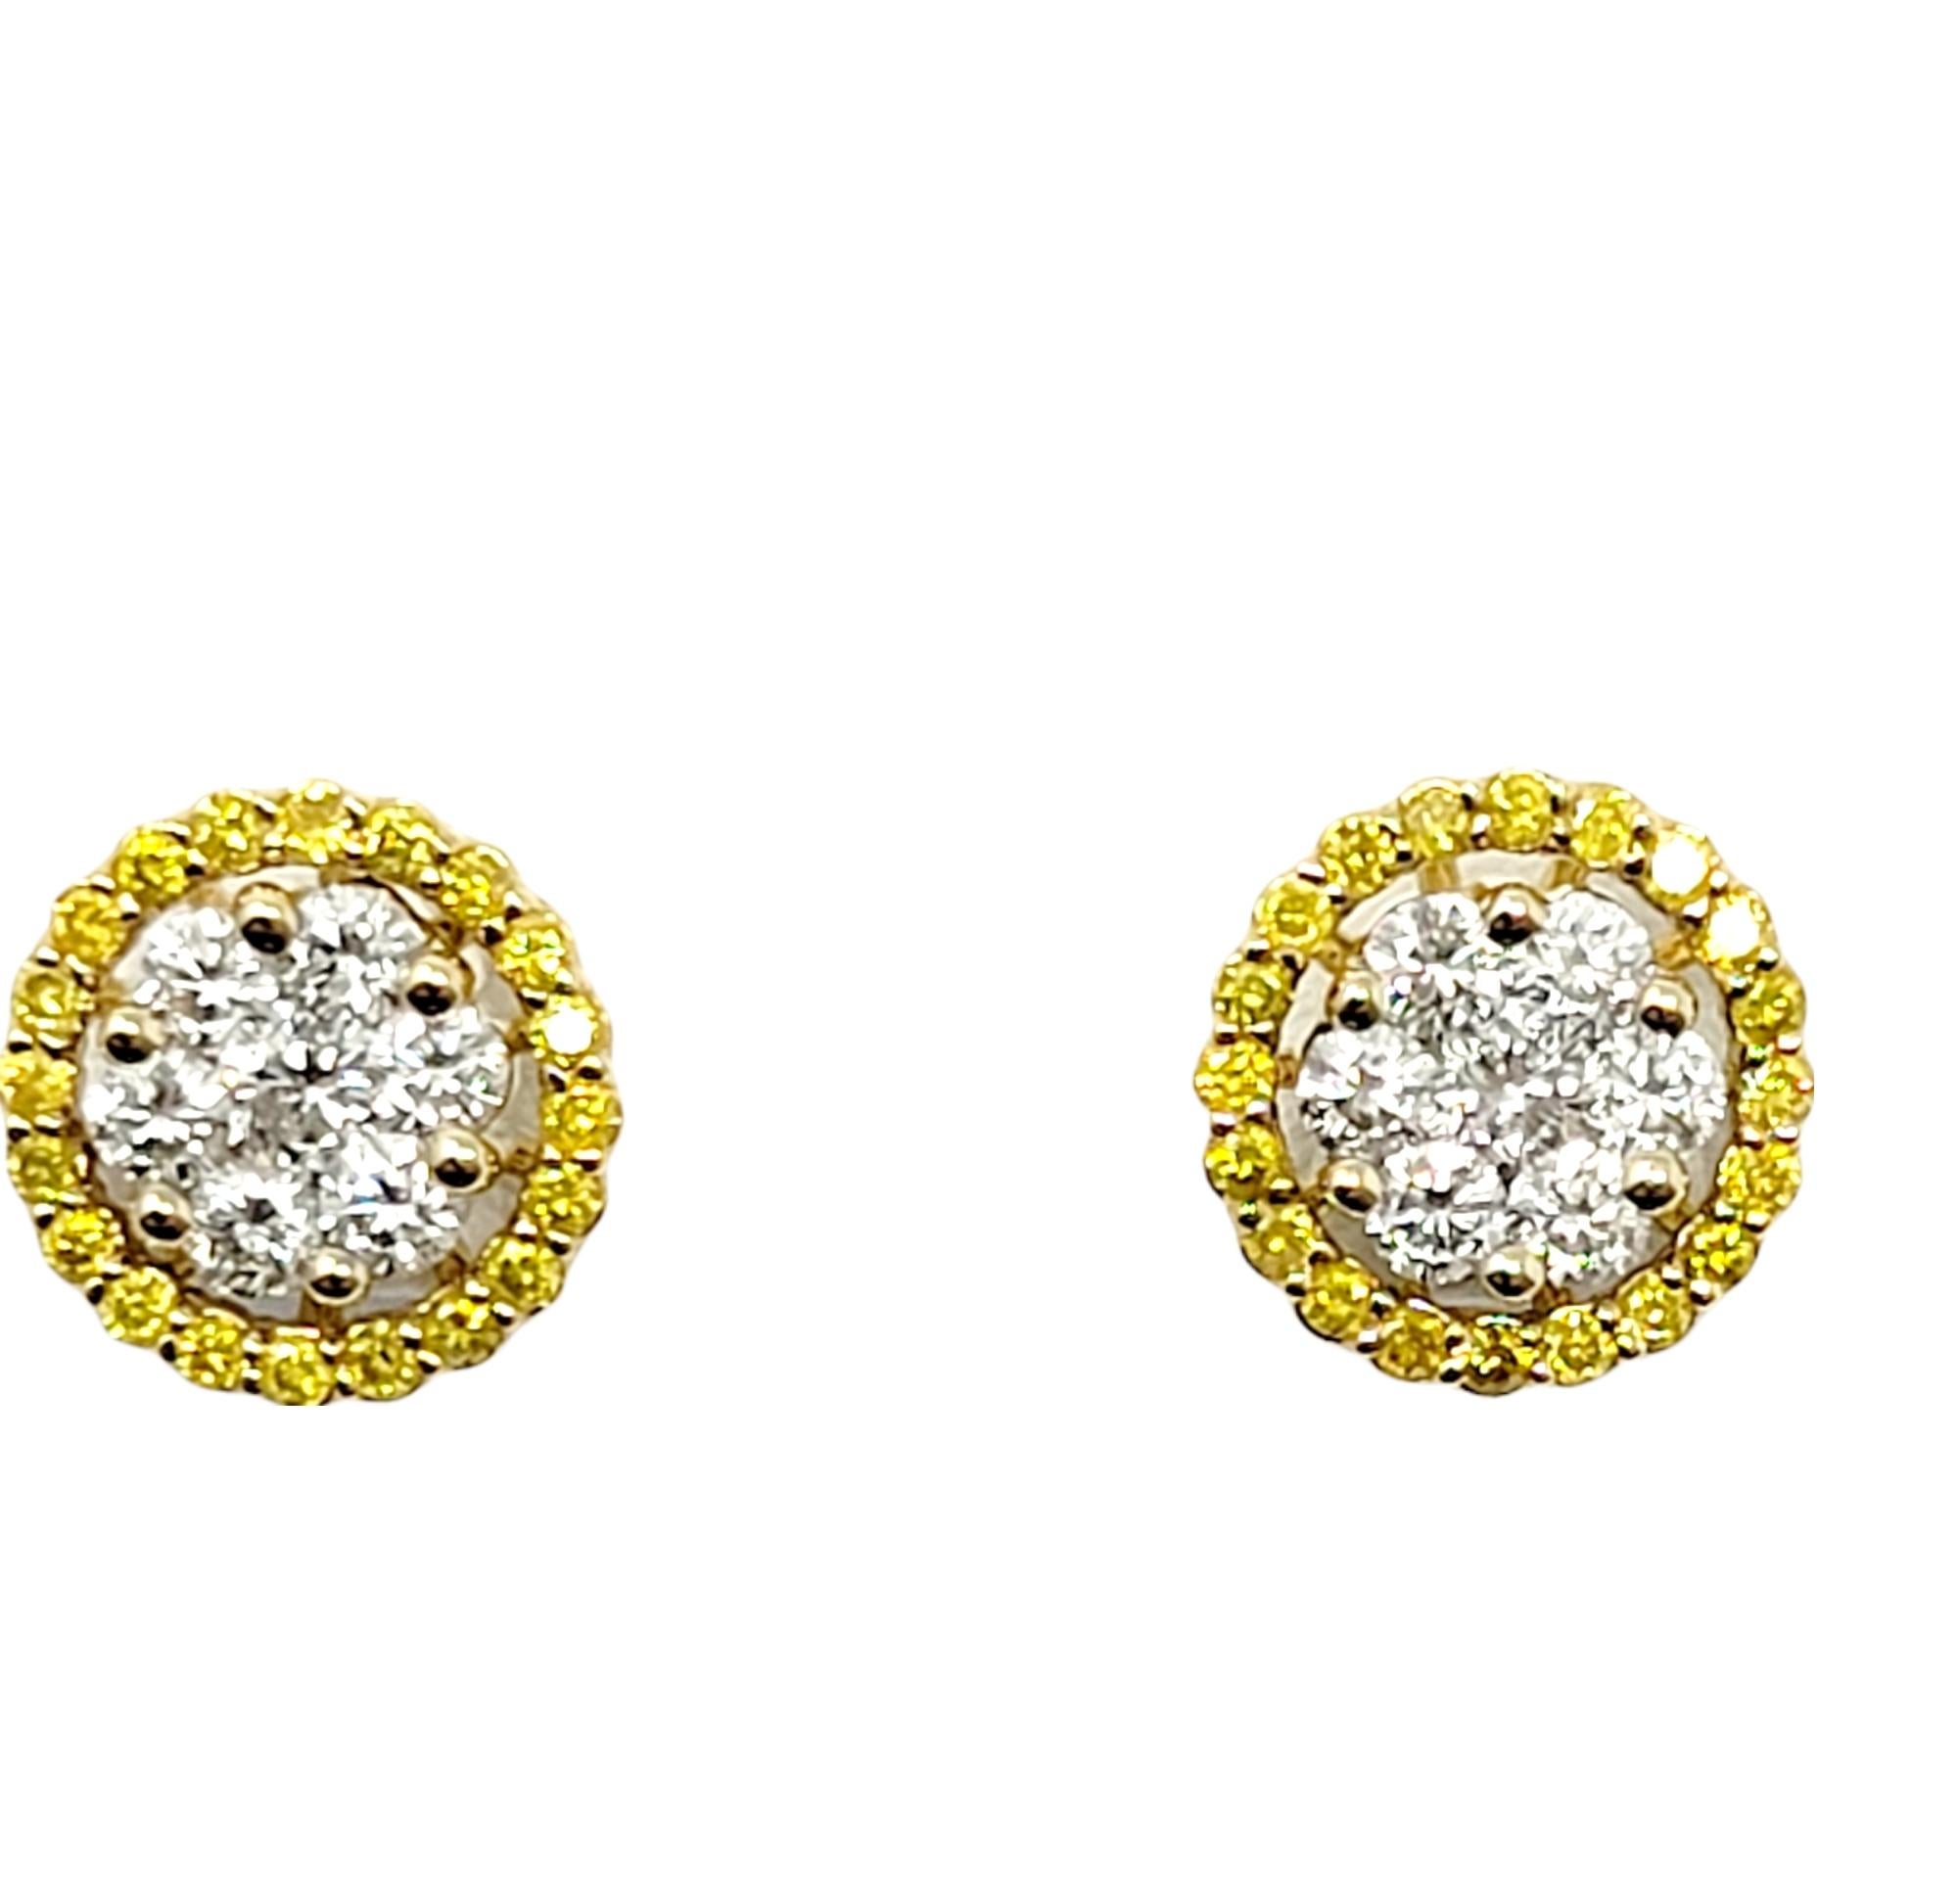 Dazzling diamond stud earrings with bright yellow diamond halo jackets. These incredible earrings can be worn with or without the jackets for 2 different looks. The versatile beauties are stunningly sparkly and are sure to become one of your new